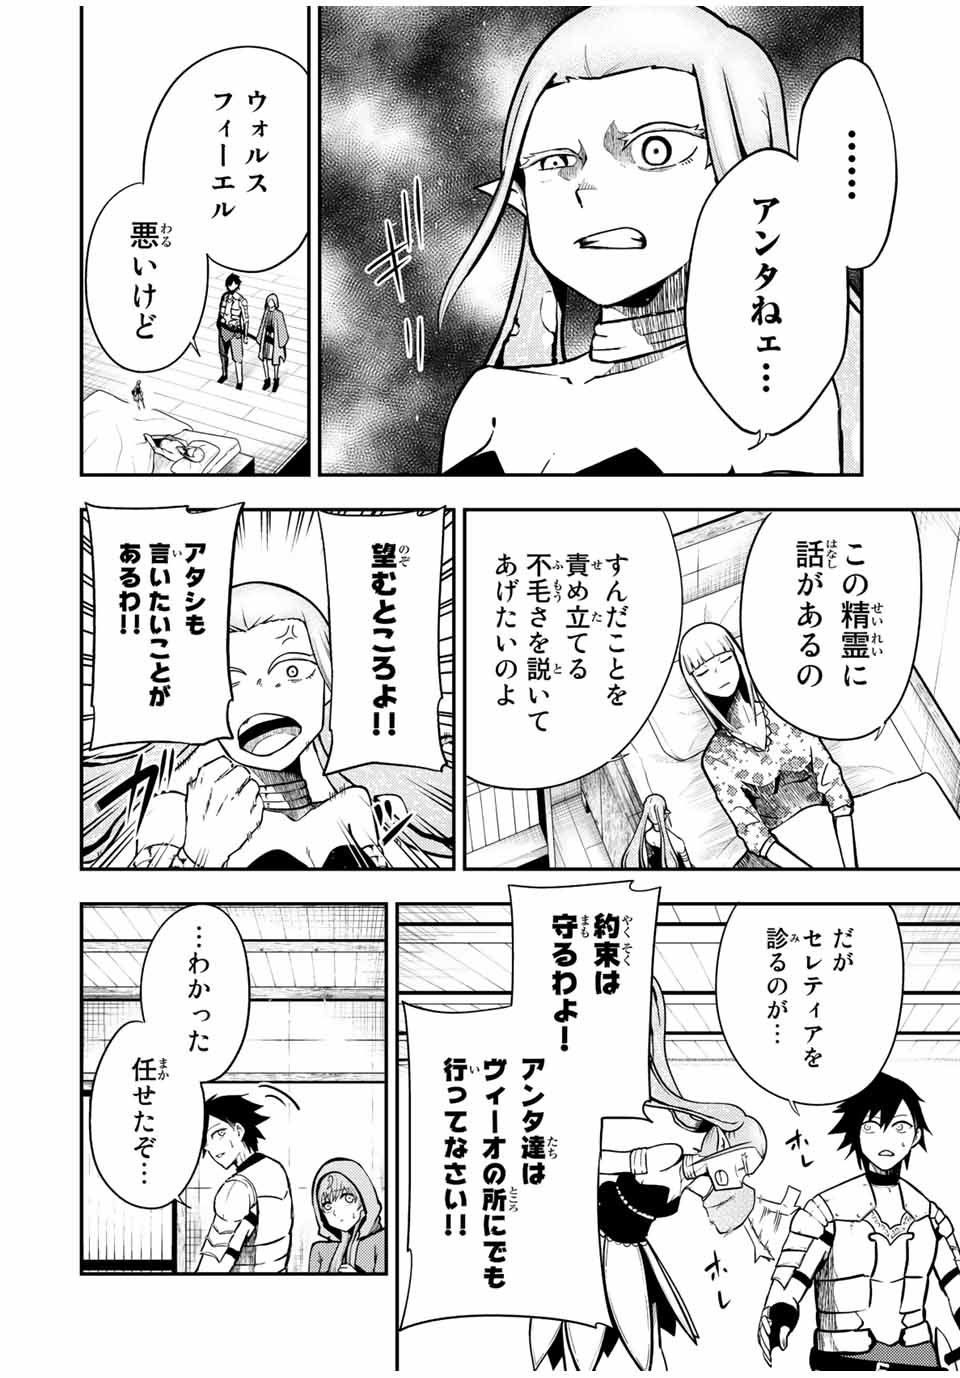 the strongest former prince-; 奴隷転生 ～その奴隷、最強の元王子につき～ 第78話 - Page 12